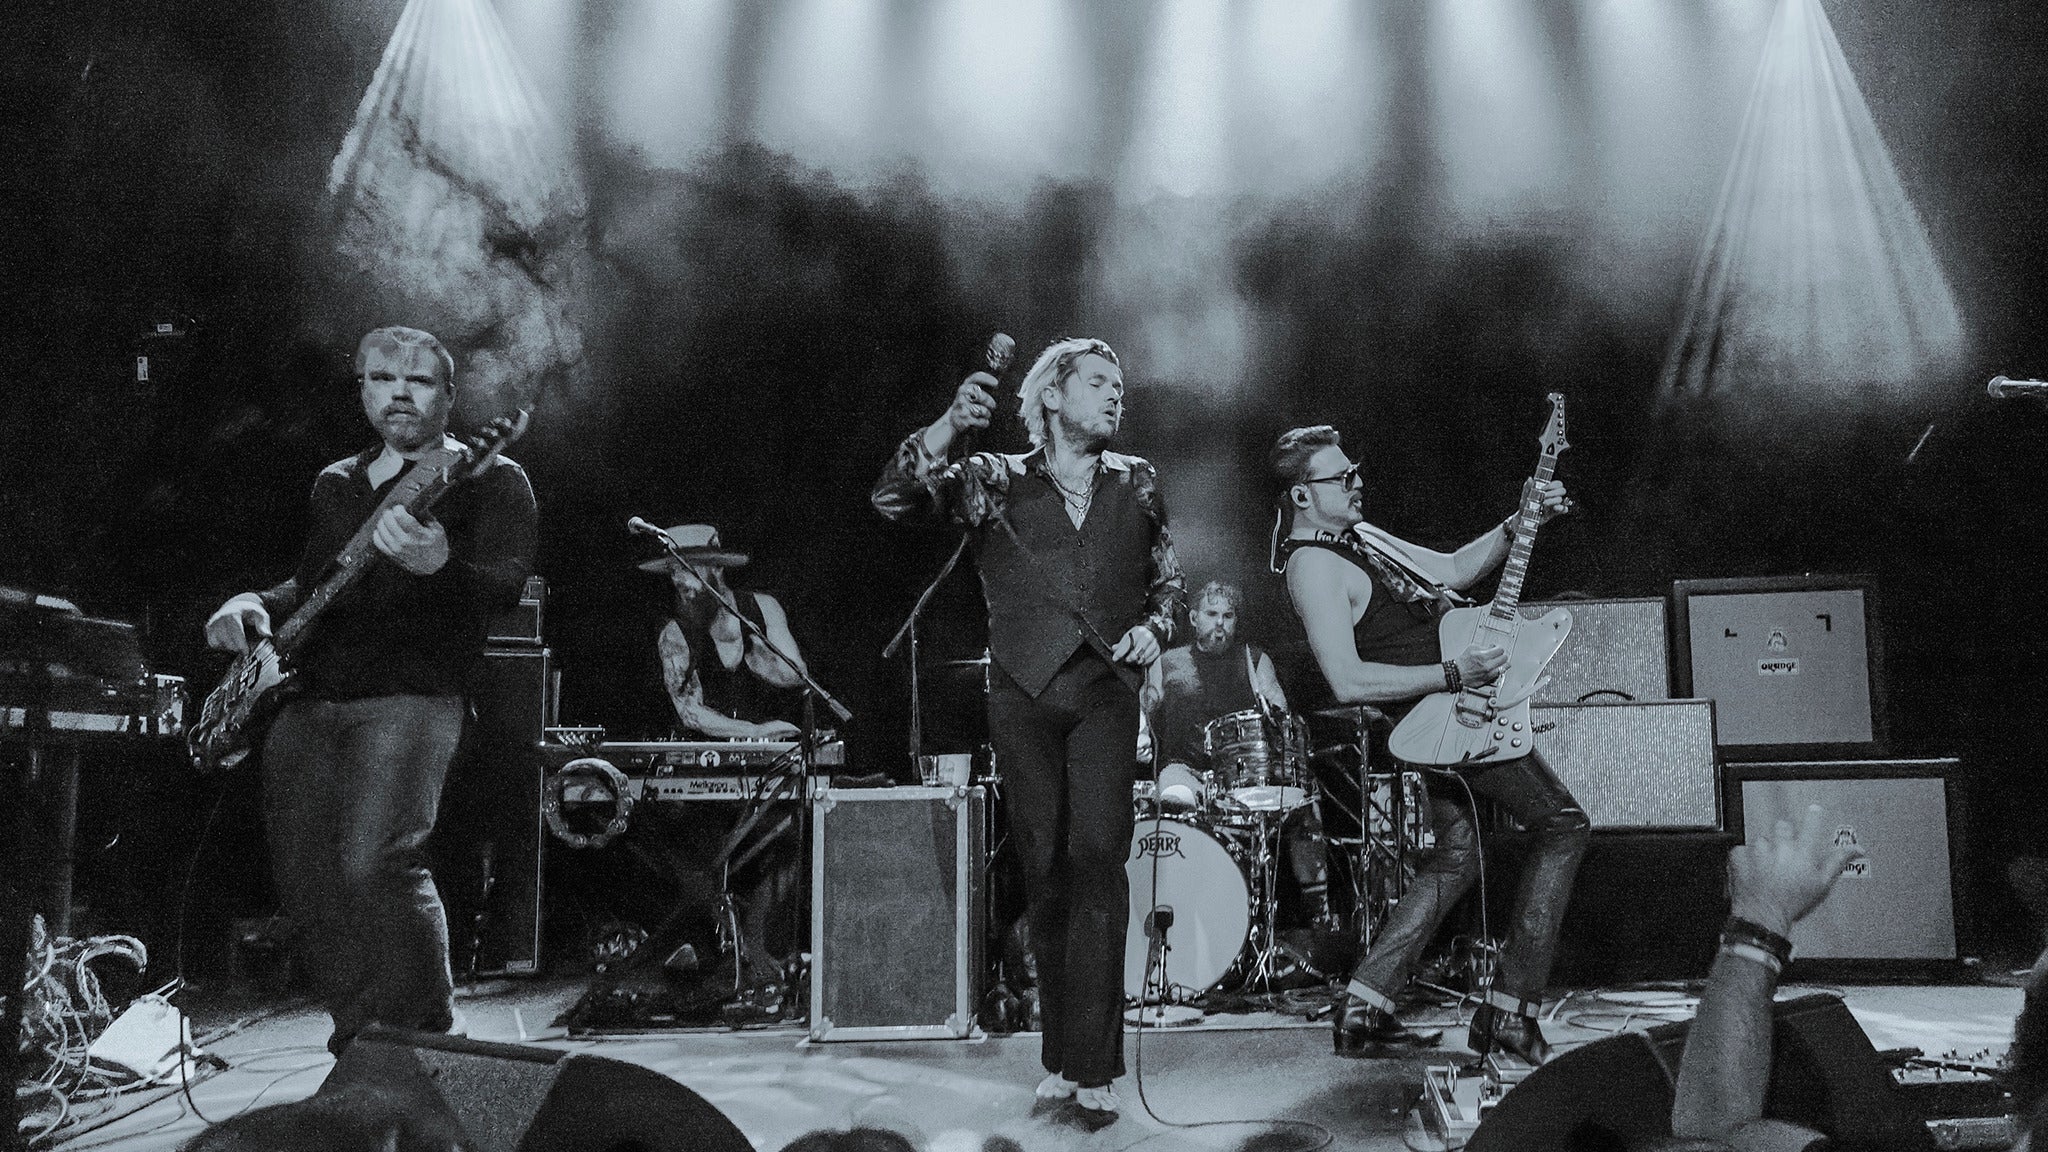 Rival Sons with Dorothy in Dallas promo photo for Band presale offer code